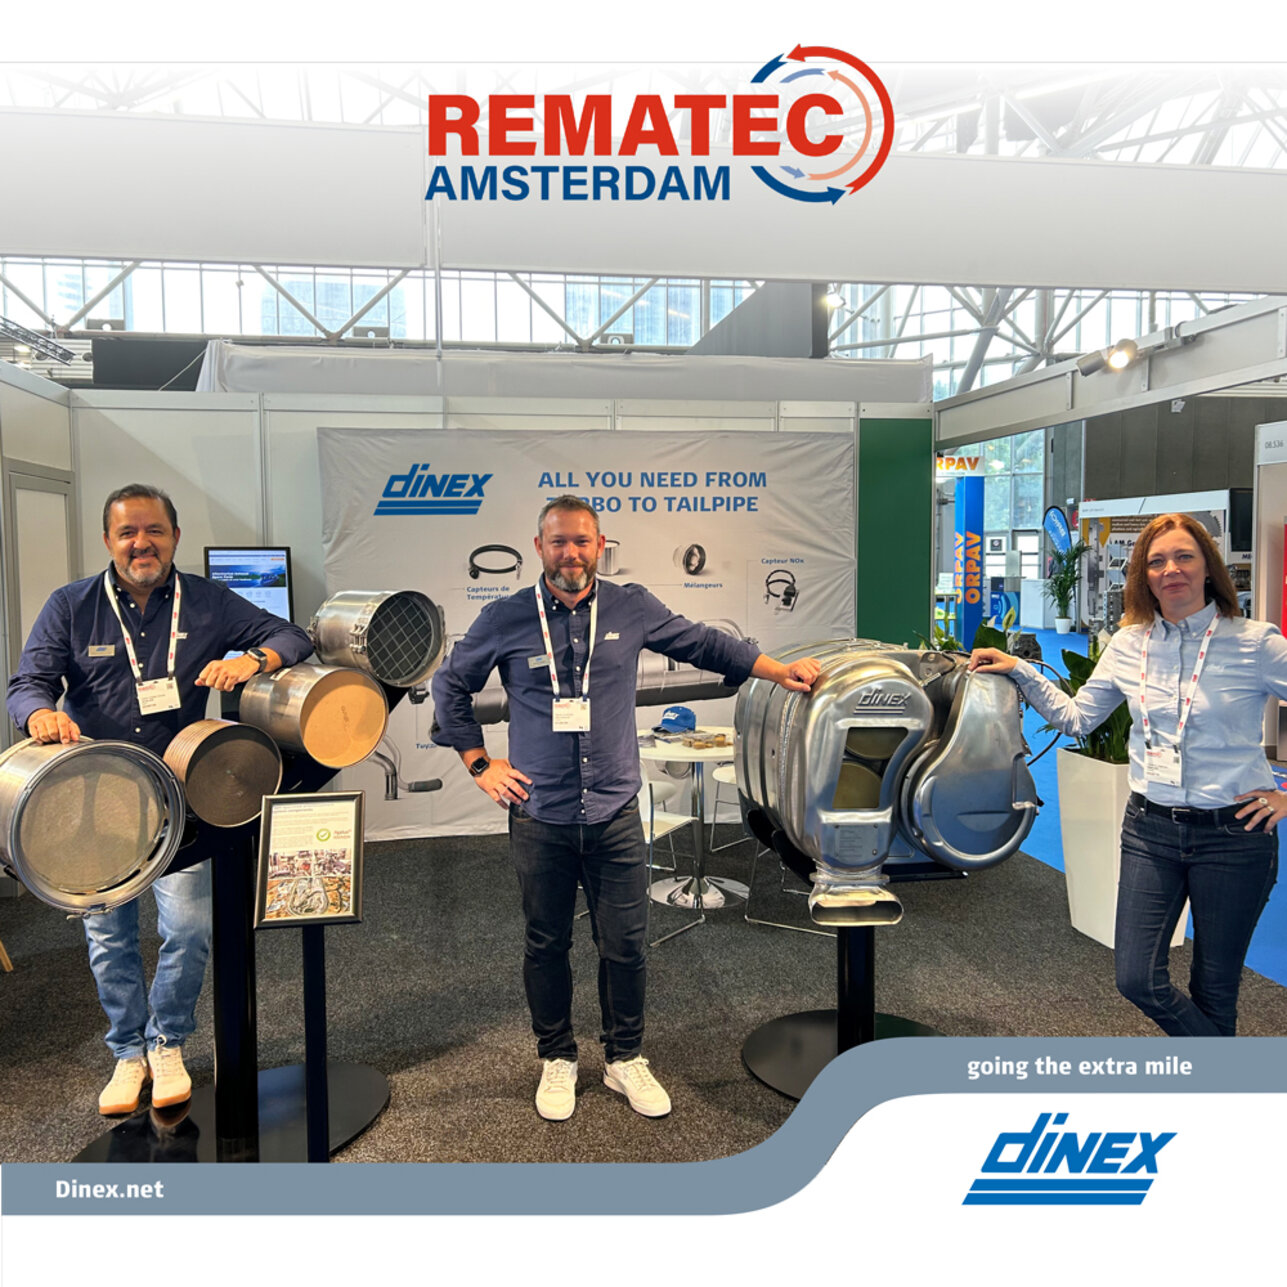 Meet us at REMATEC in Amsterdam!